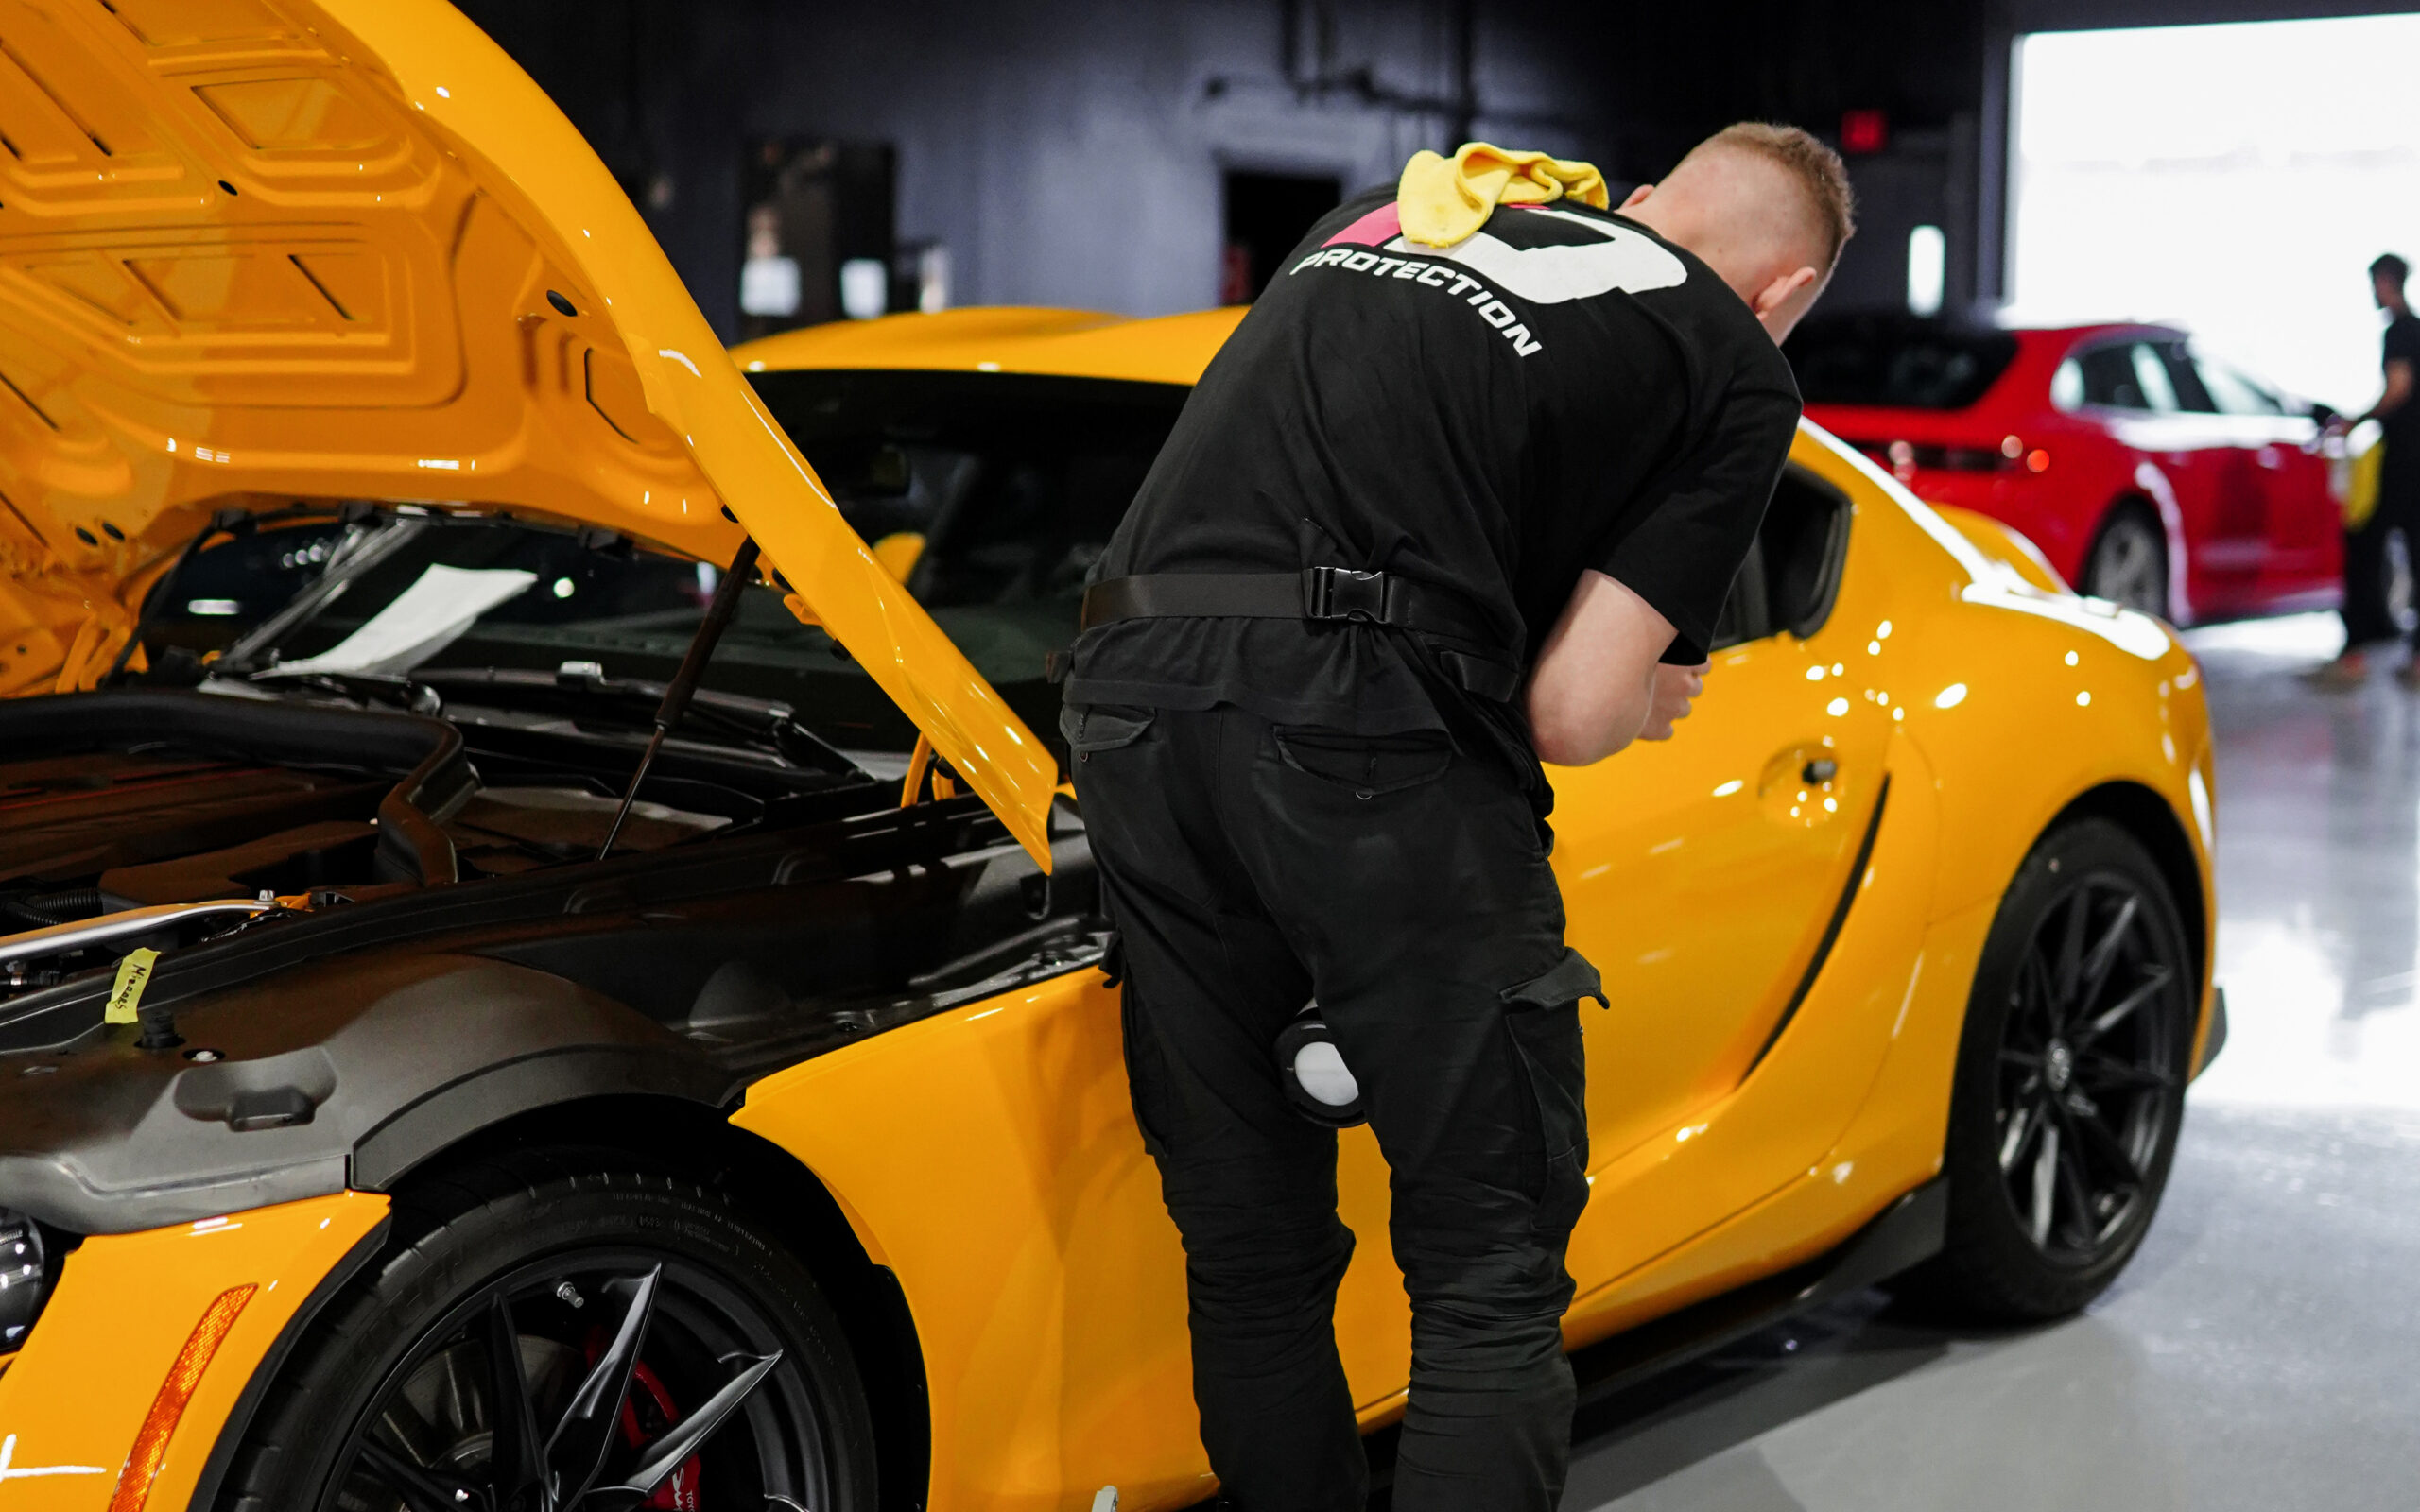 Why Install Paint Protection Film (PPF) on your vehicle?